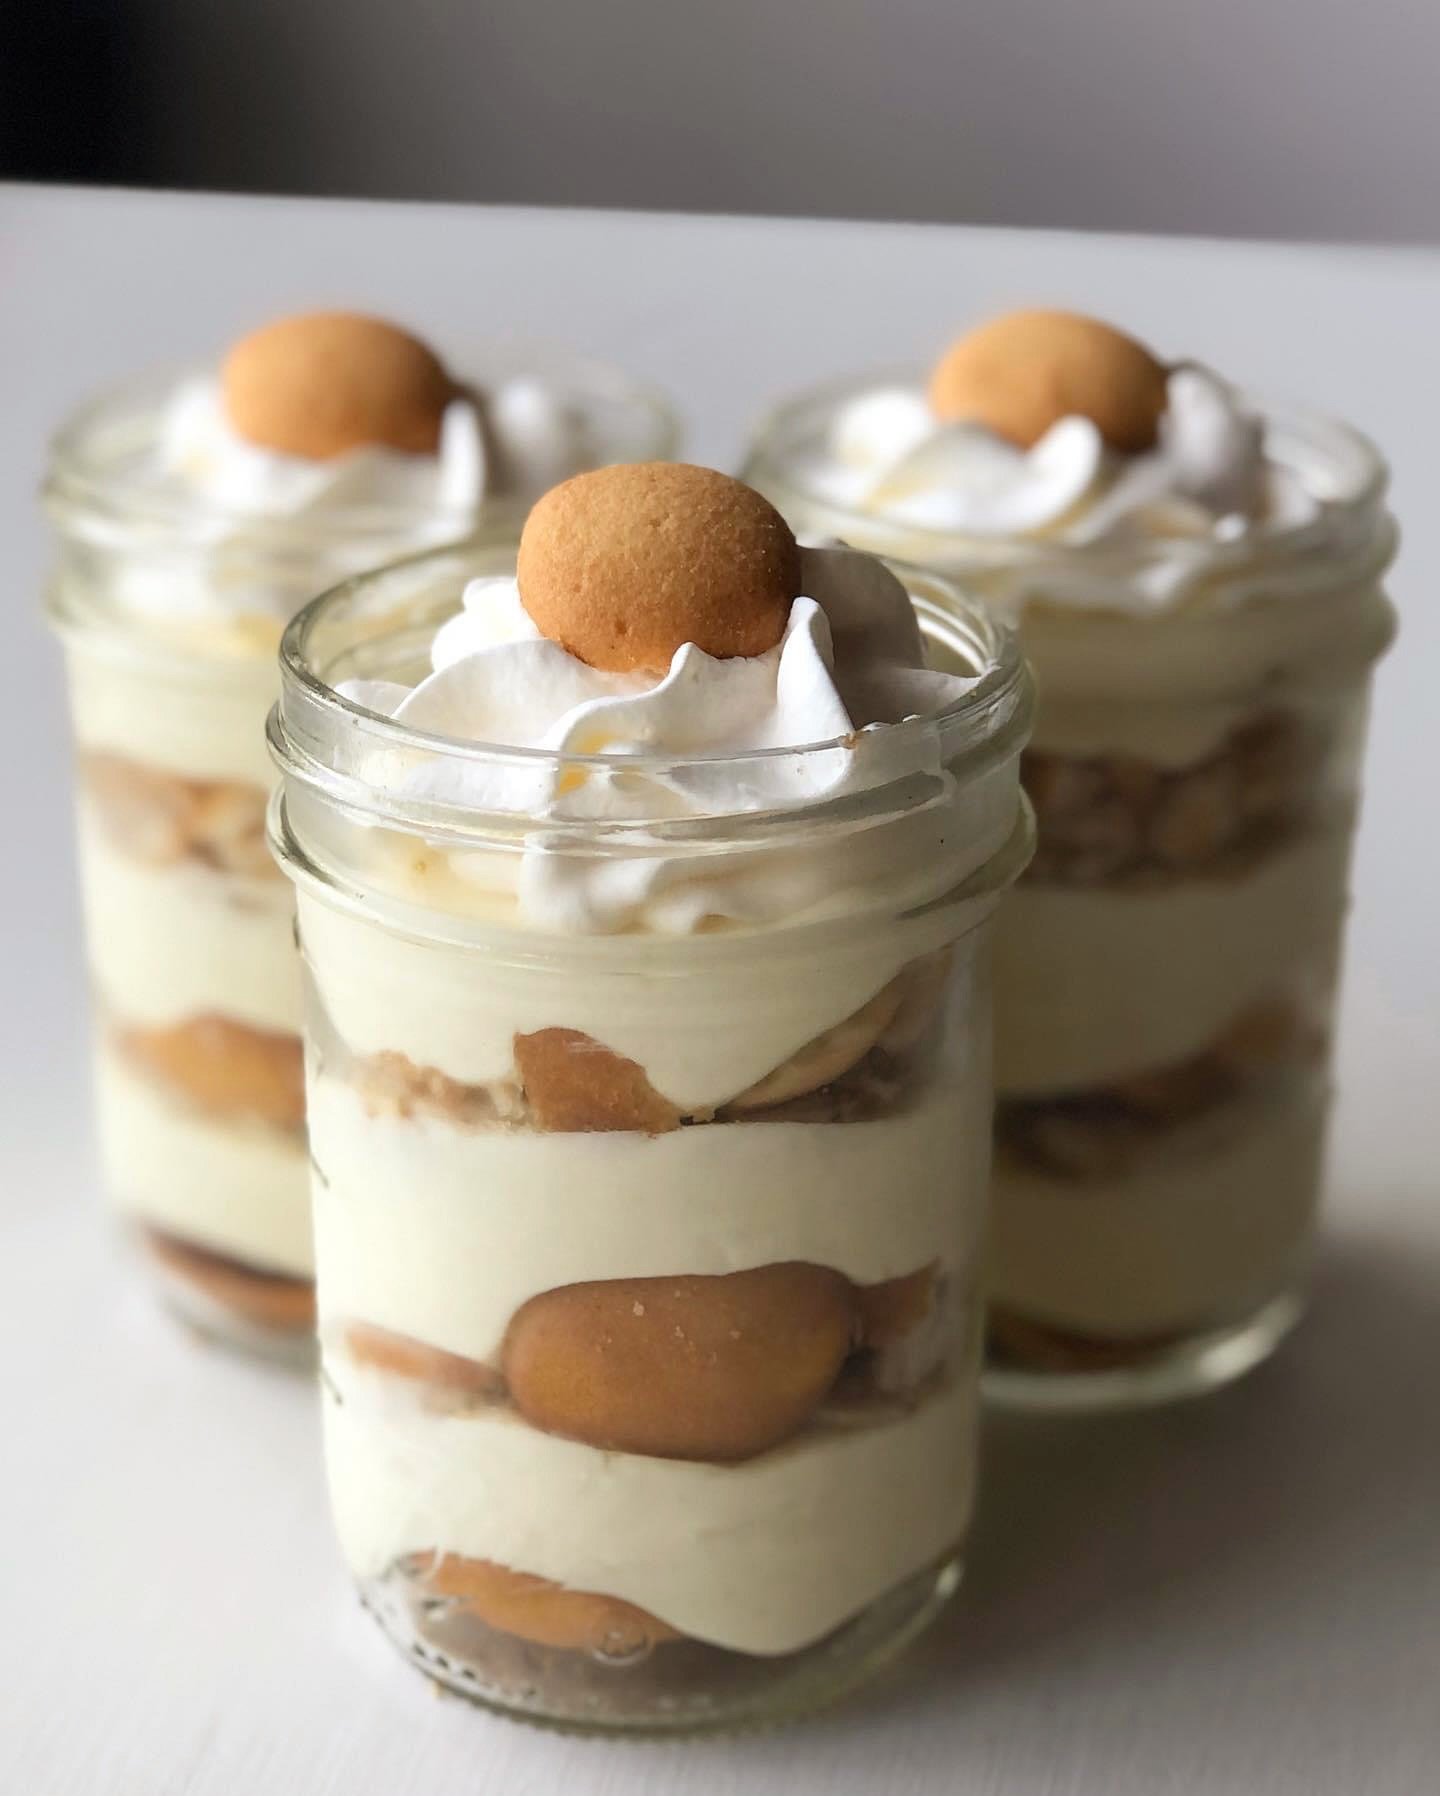 Mom deserves a dessert as ✨classic✨ as she is

Snag some banana pudding this Mother&rsquo;s Day in these cute little mason jars😍 We&rsquo;re taking orders until 2pm on Saturday, so place your order now‼️

**banana puddings are single-serve size**

.